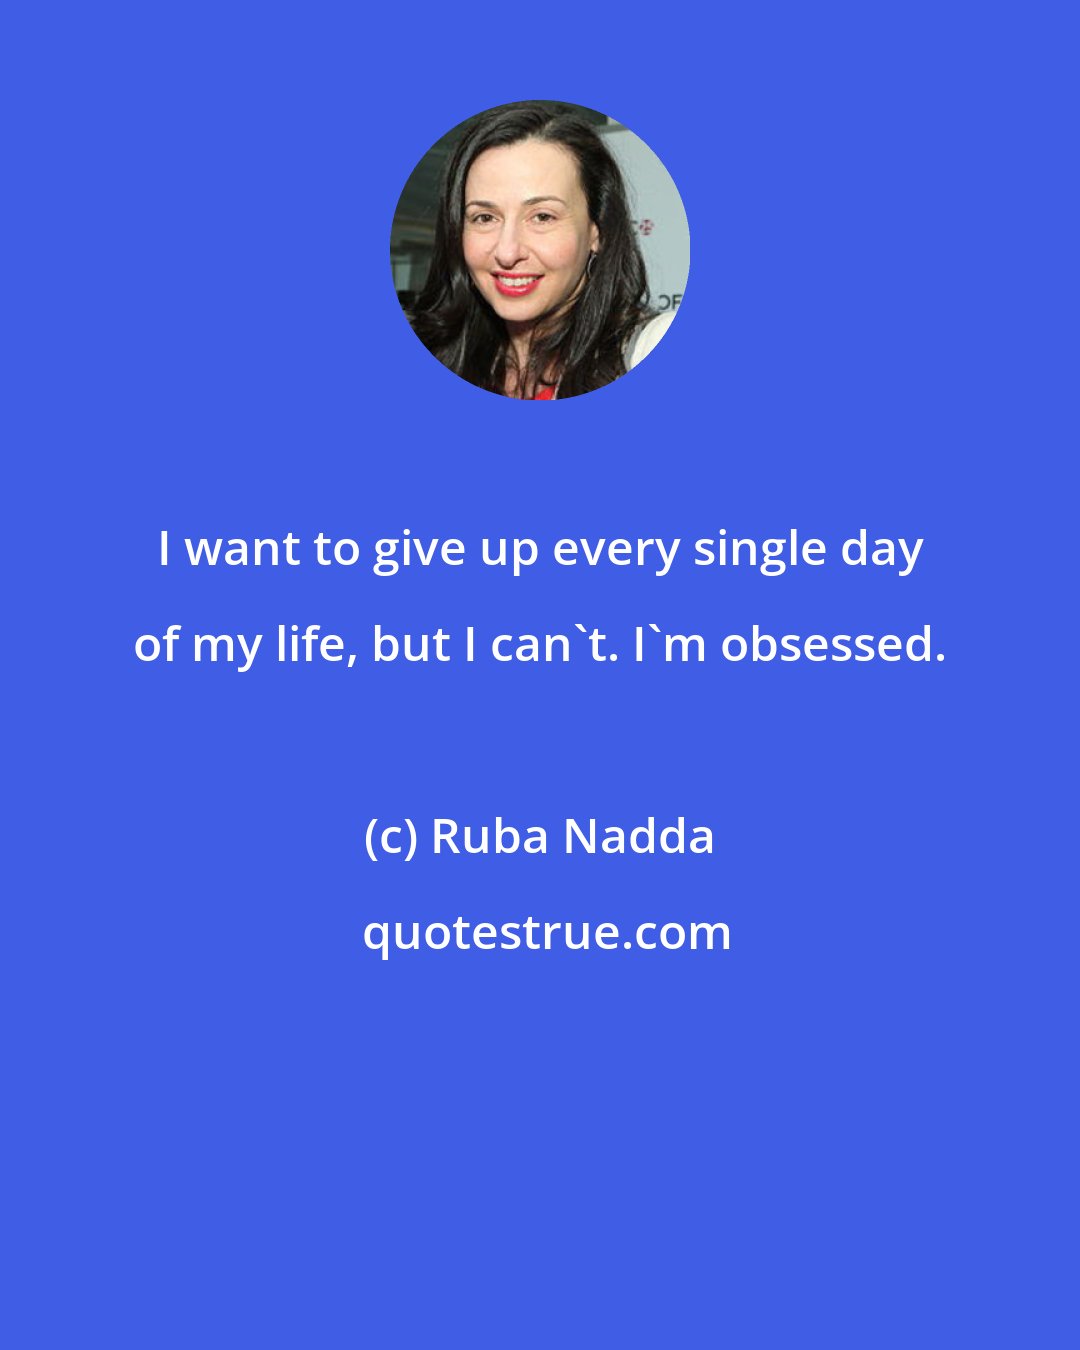 Ruba Nadda: I want to give up every single day of my life, but I can't. I'm obsessed.